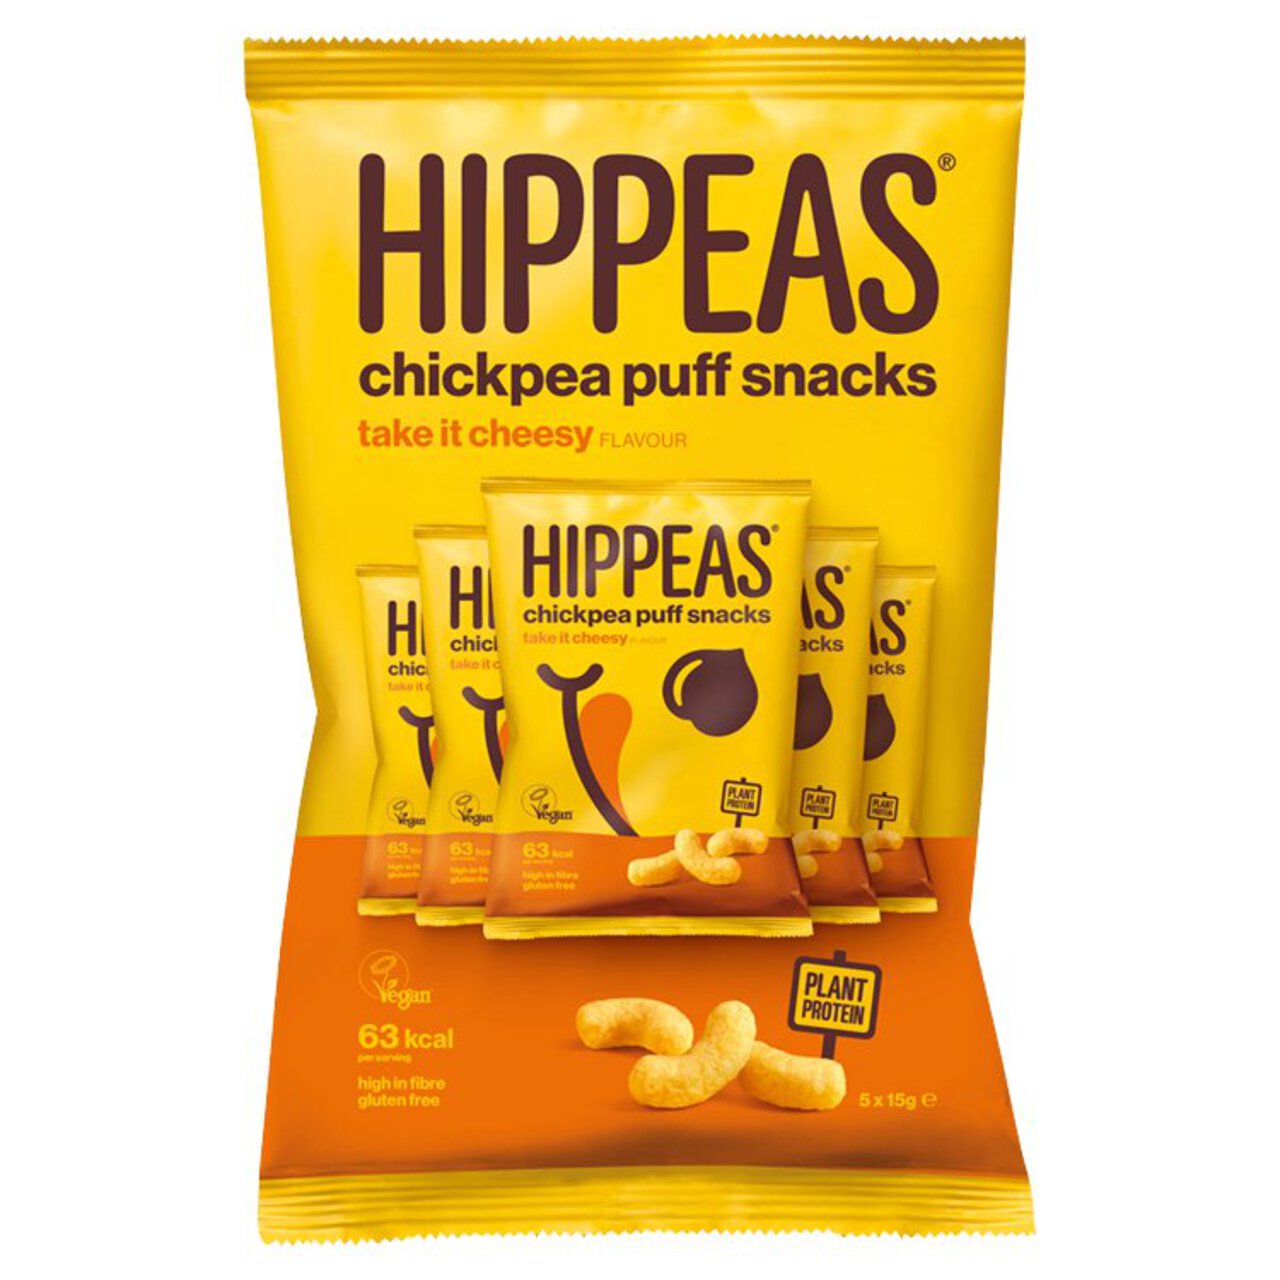 Hippeas Chickpea Puffs - Take it Cheesy Multipack 5 x 15g